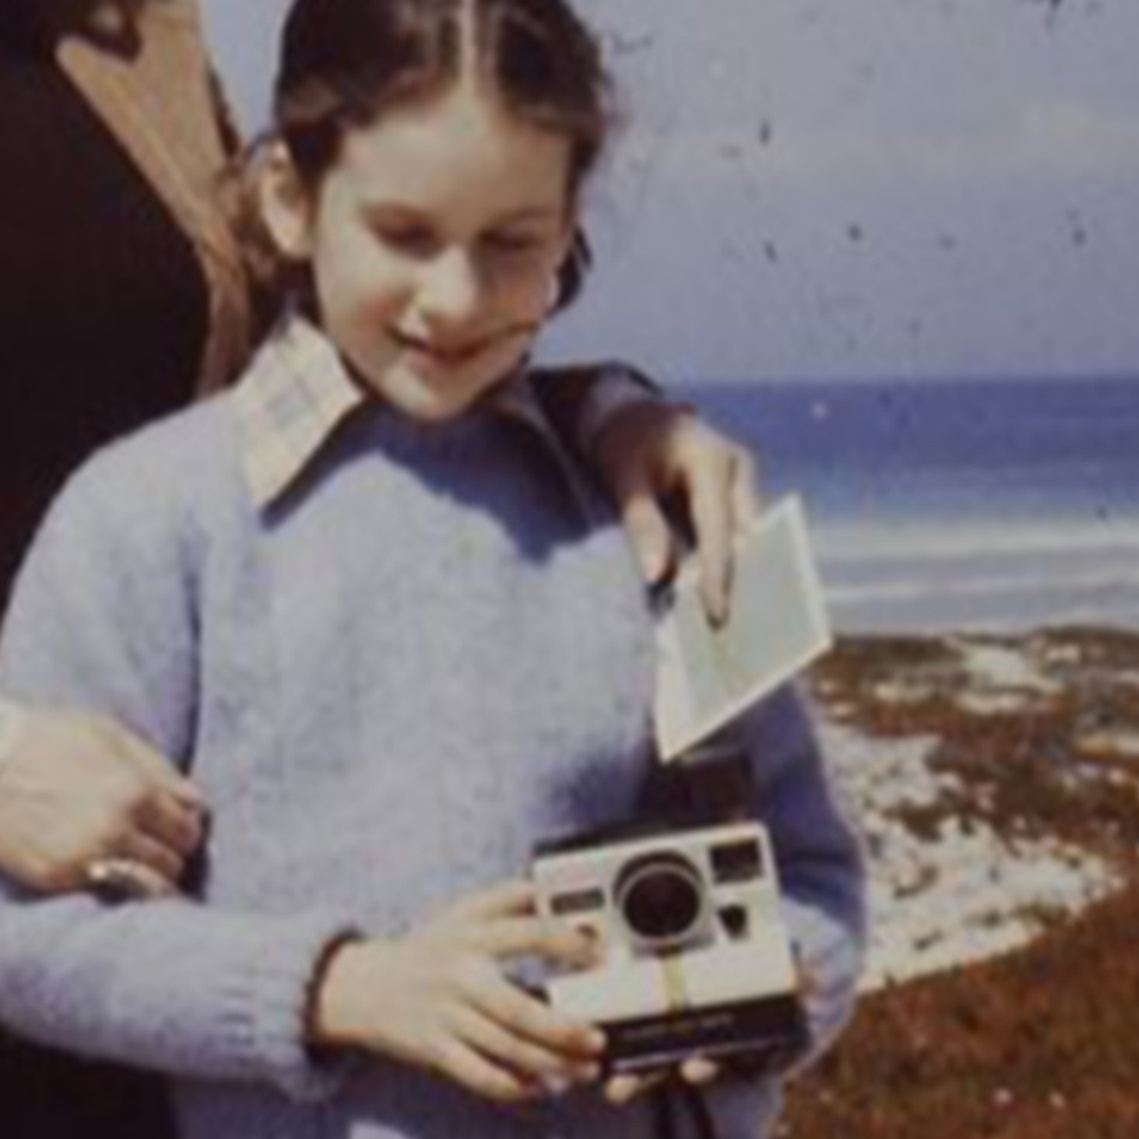 Melissa Cooperman with family and her first Polaroid camera.